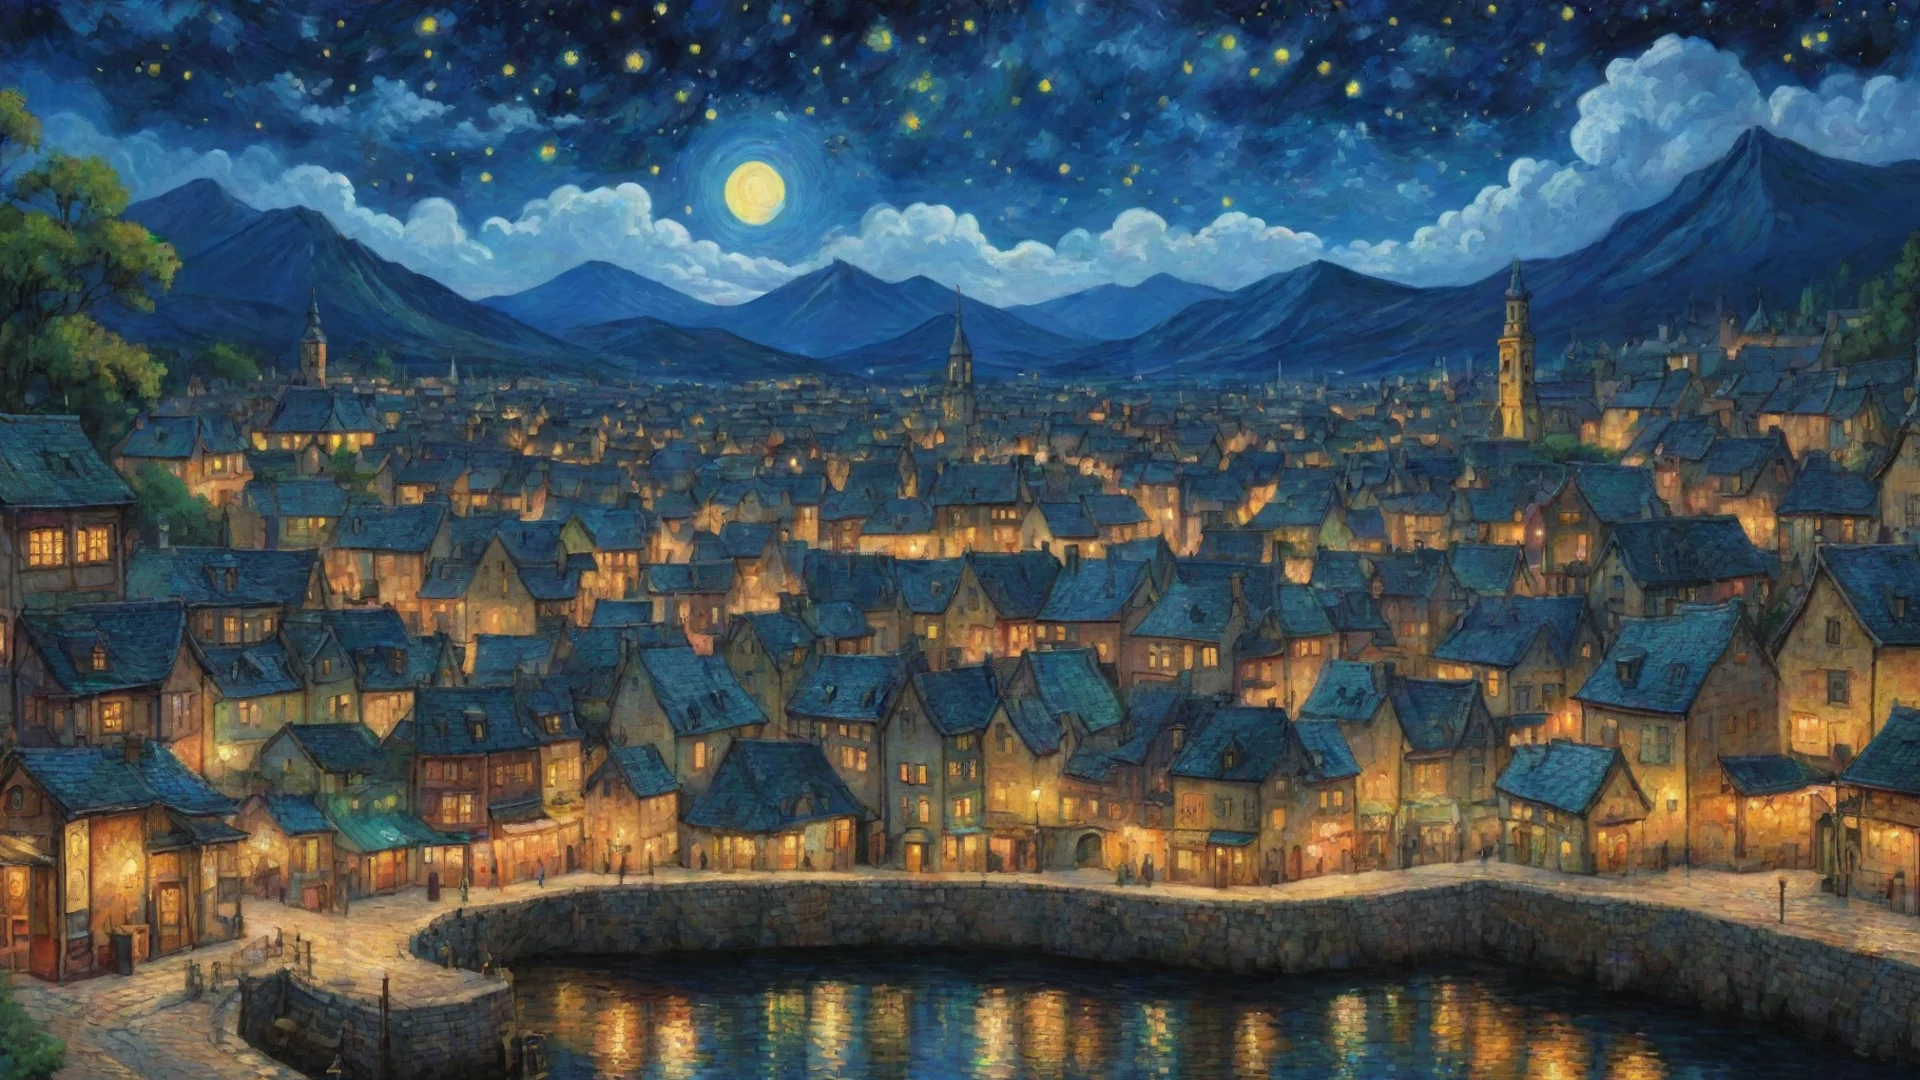 aitown lit up at night sky epic lovely artistic ghibli van gogh happyness bliss peace  detailed asthetic hd wow wide